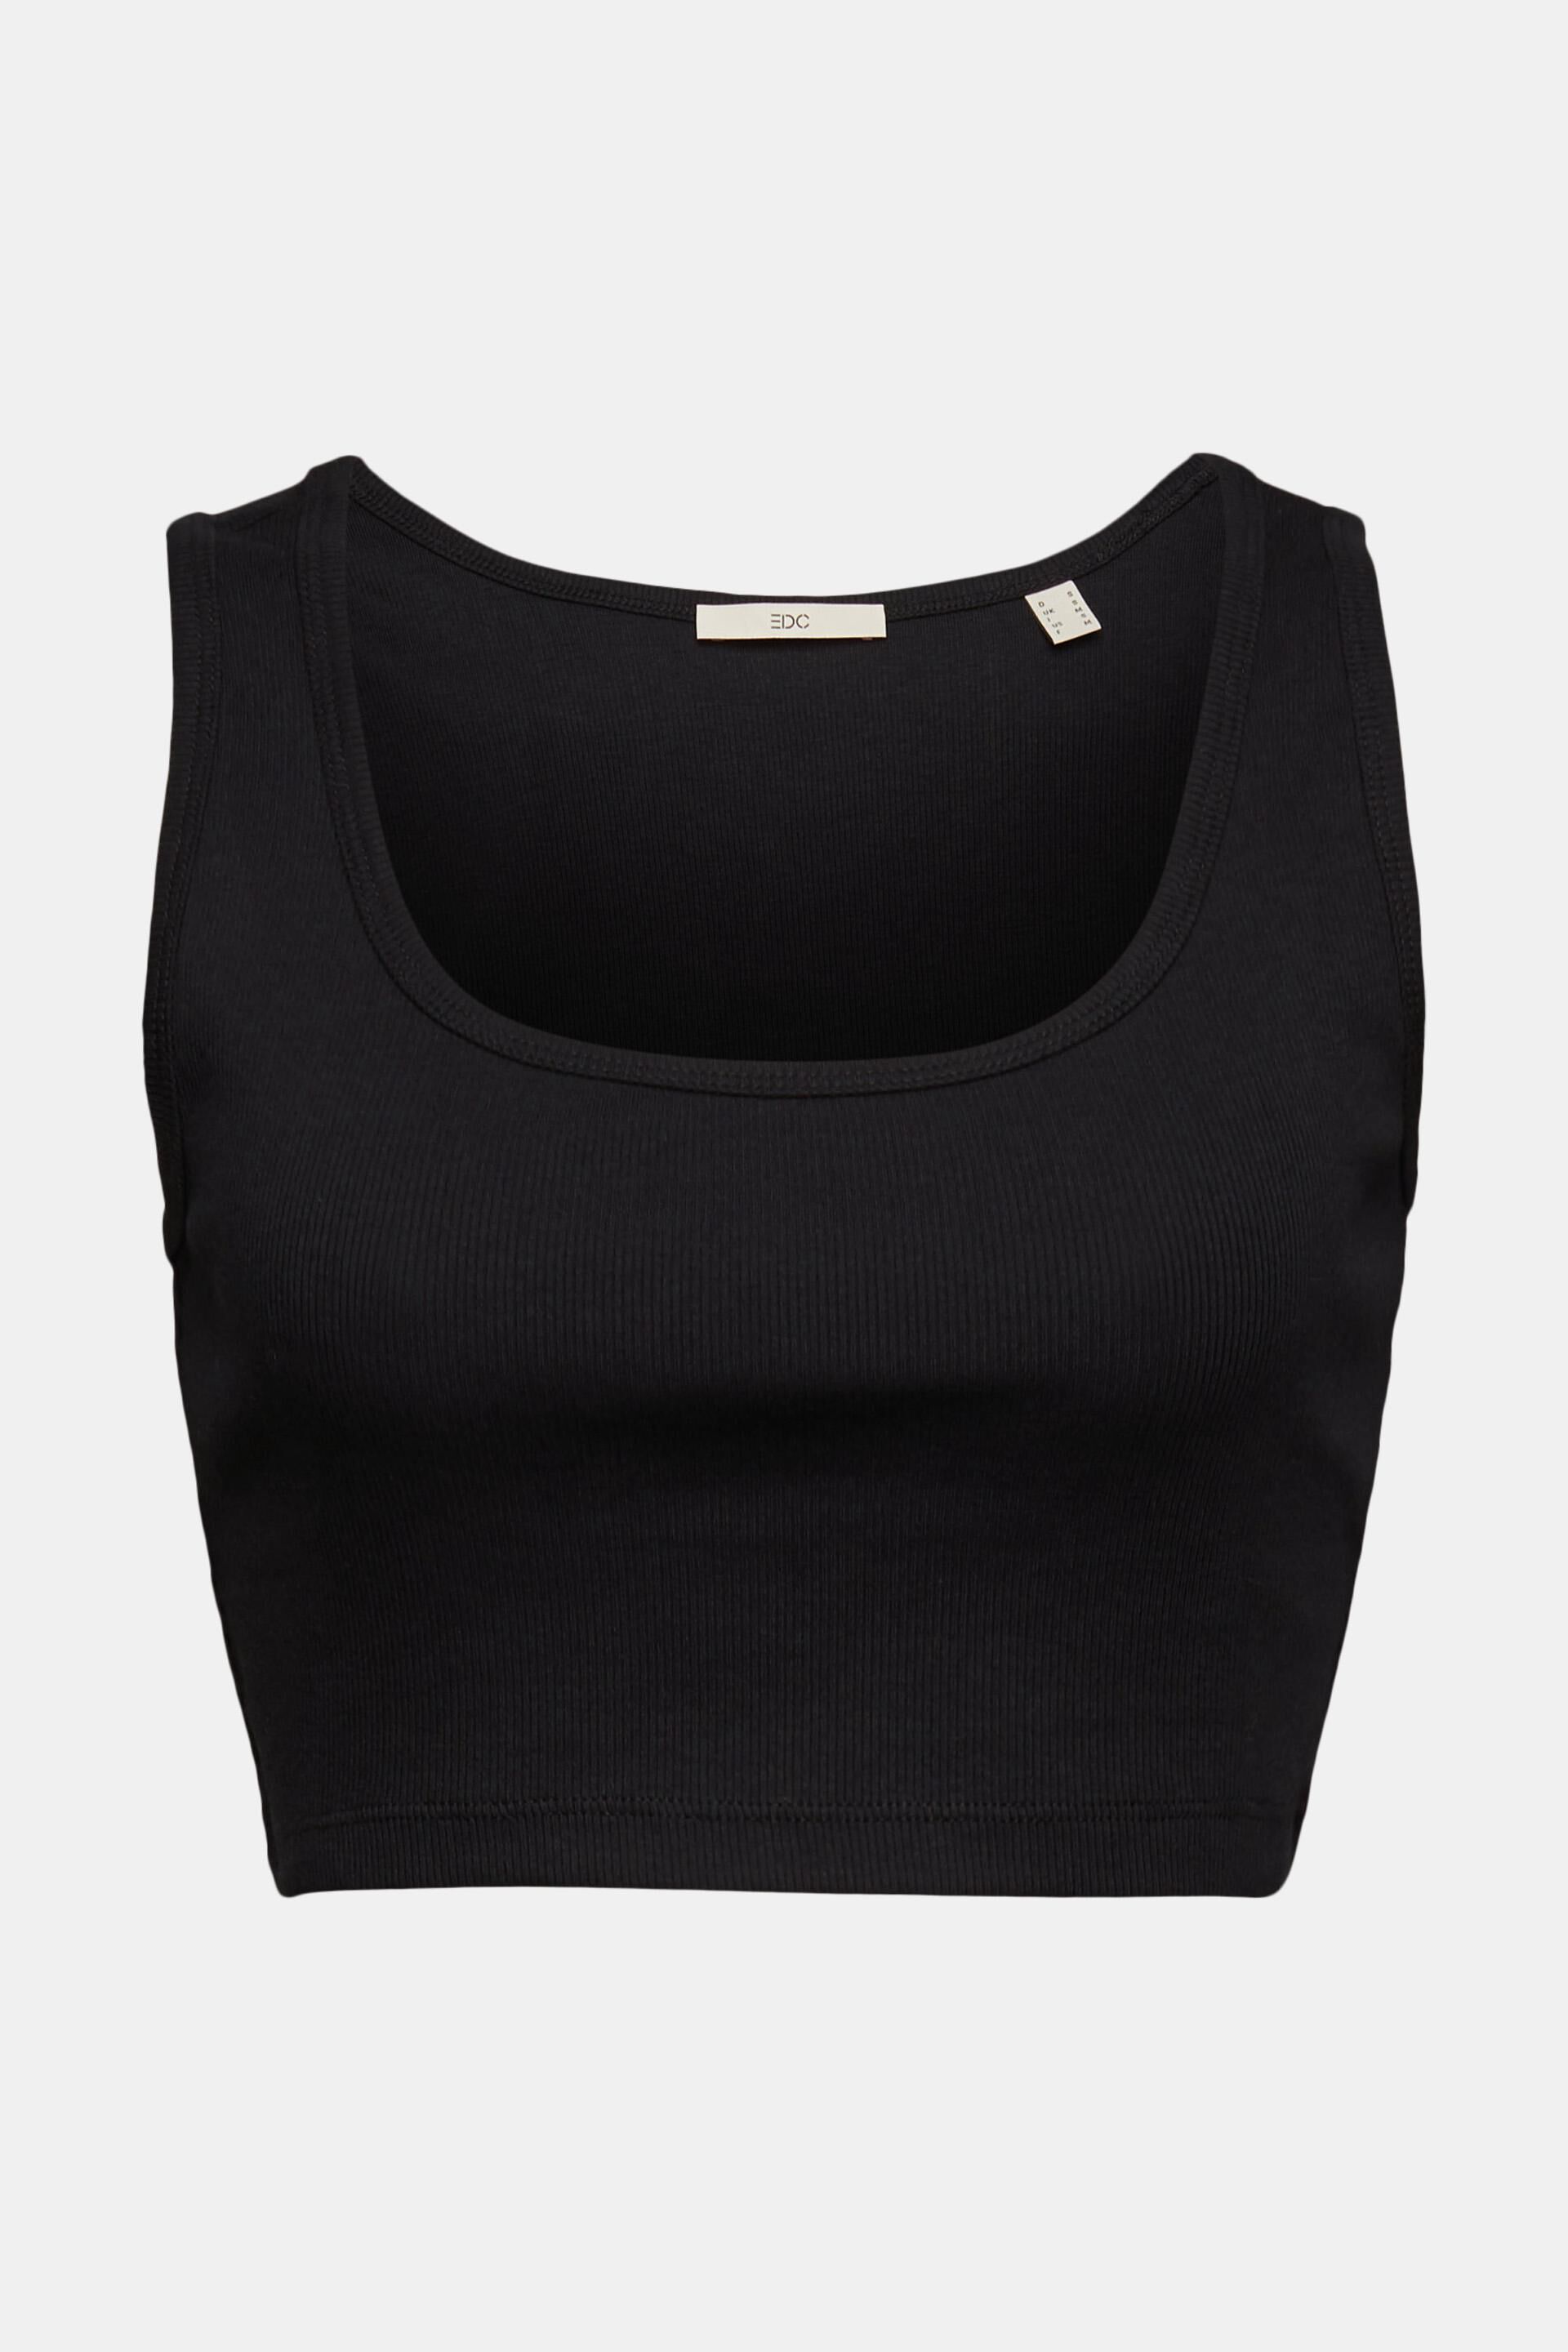 Mode Tops Camisoles edc by Esprit Camisole zwart casual uitstraling 